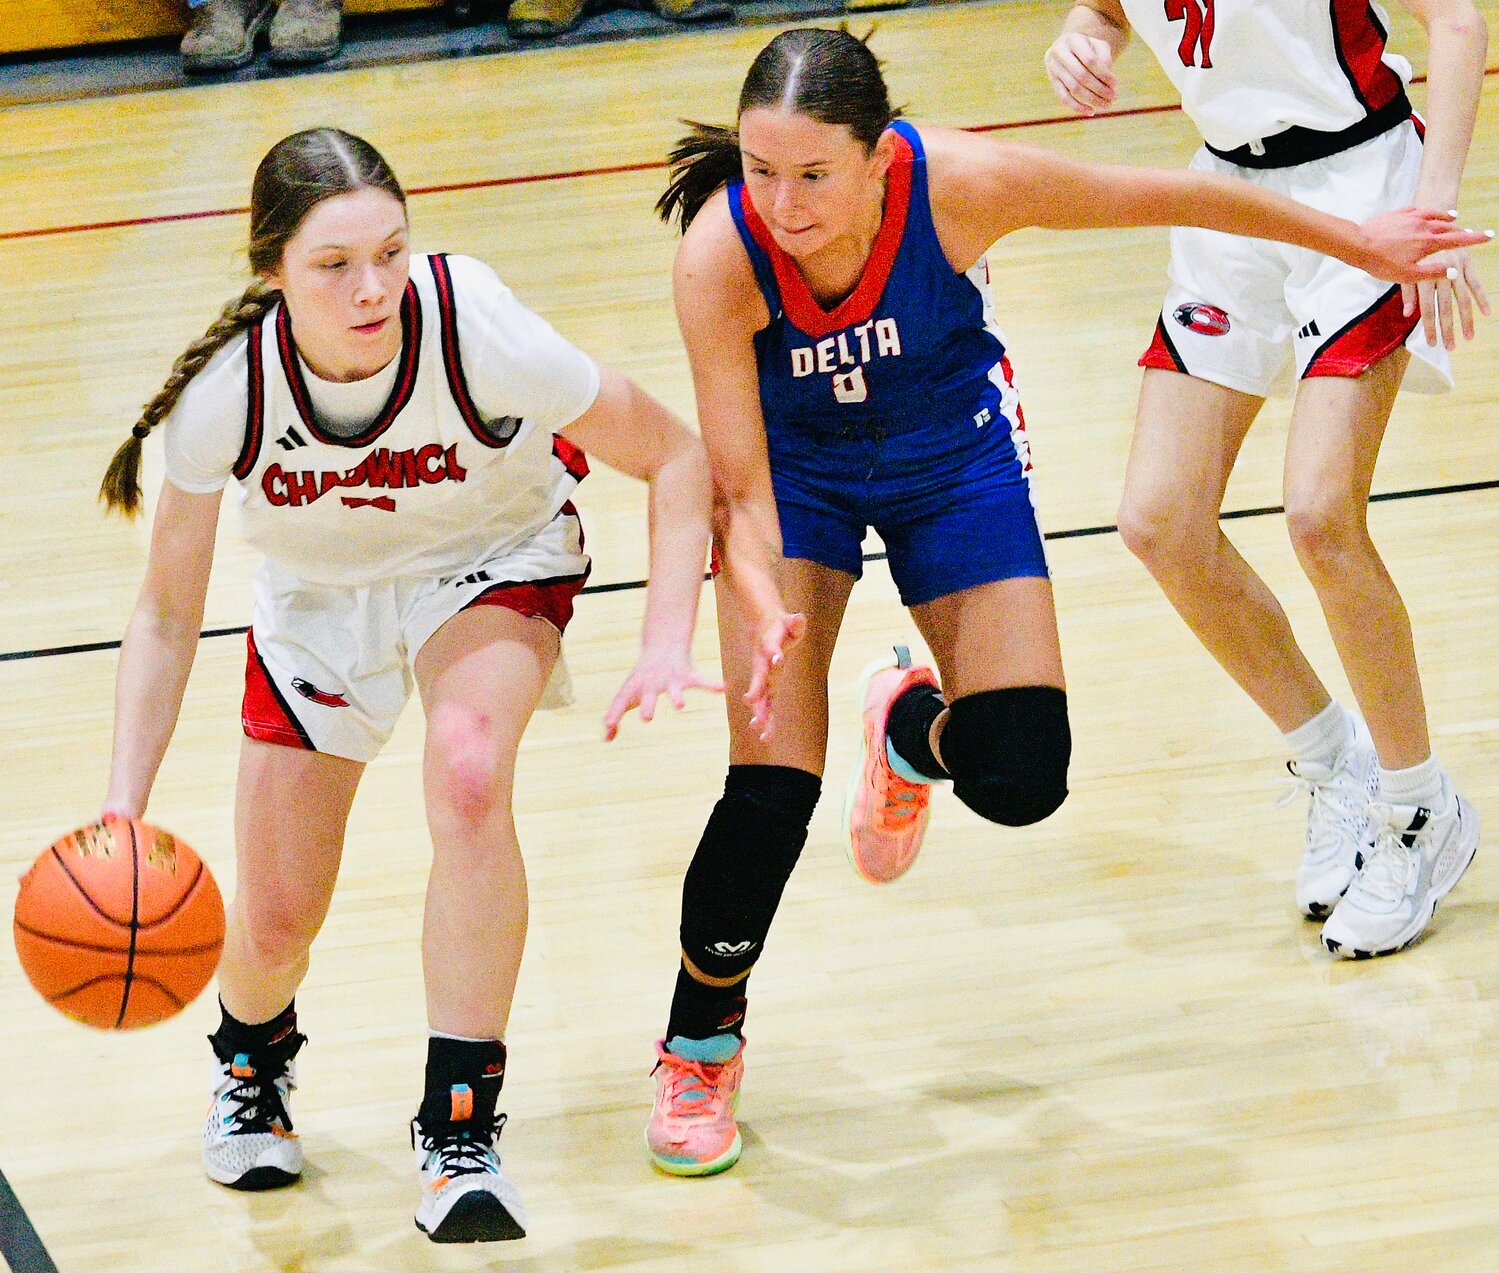 CHADWICK'S RAE LITTLE looks for room around a defender.